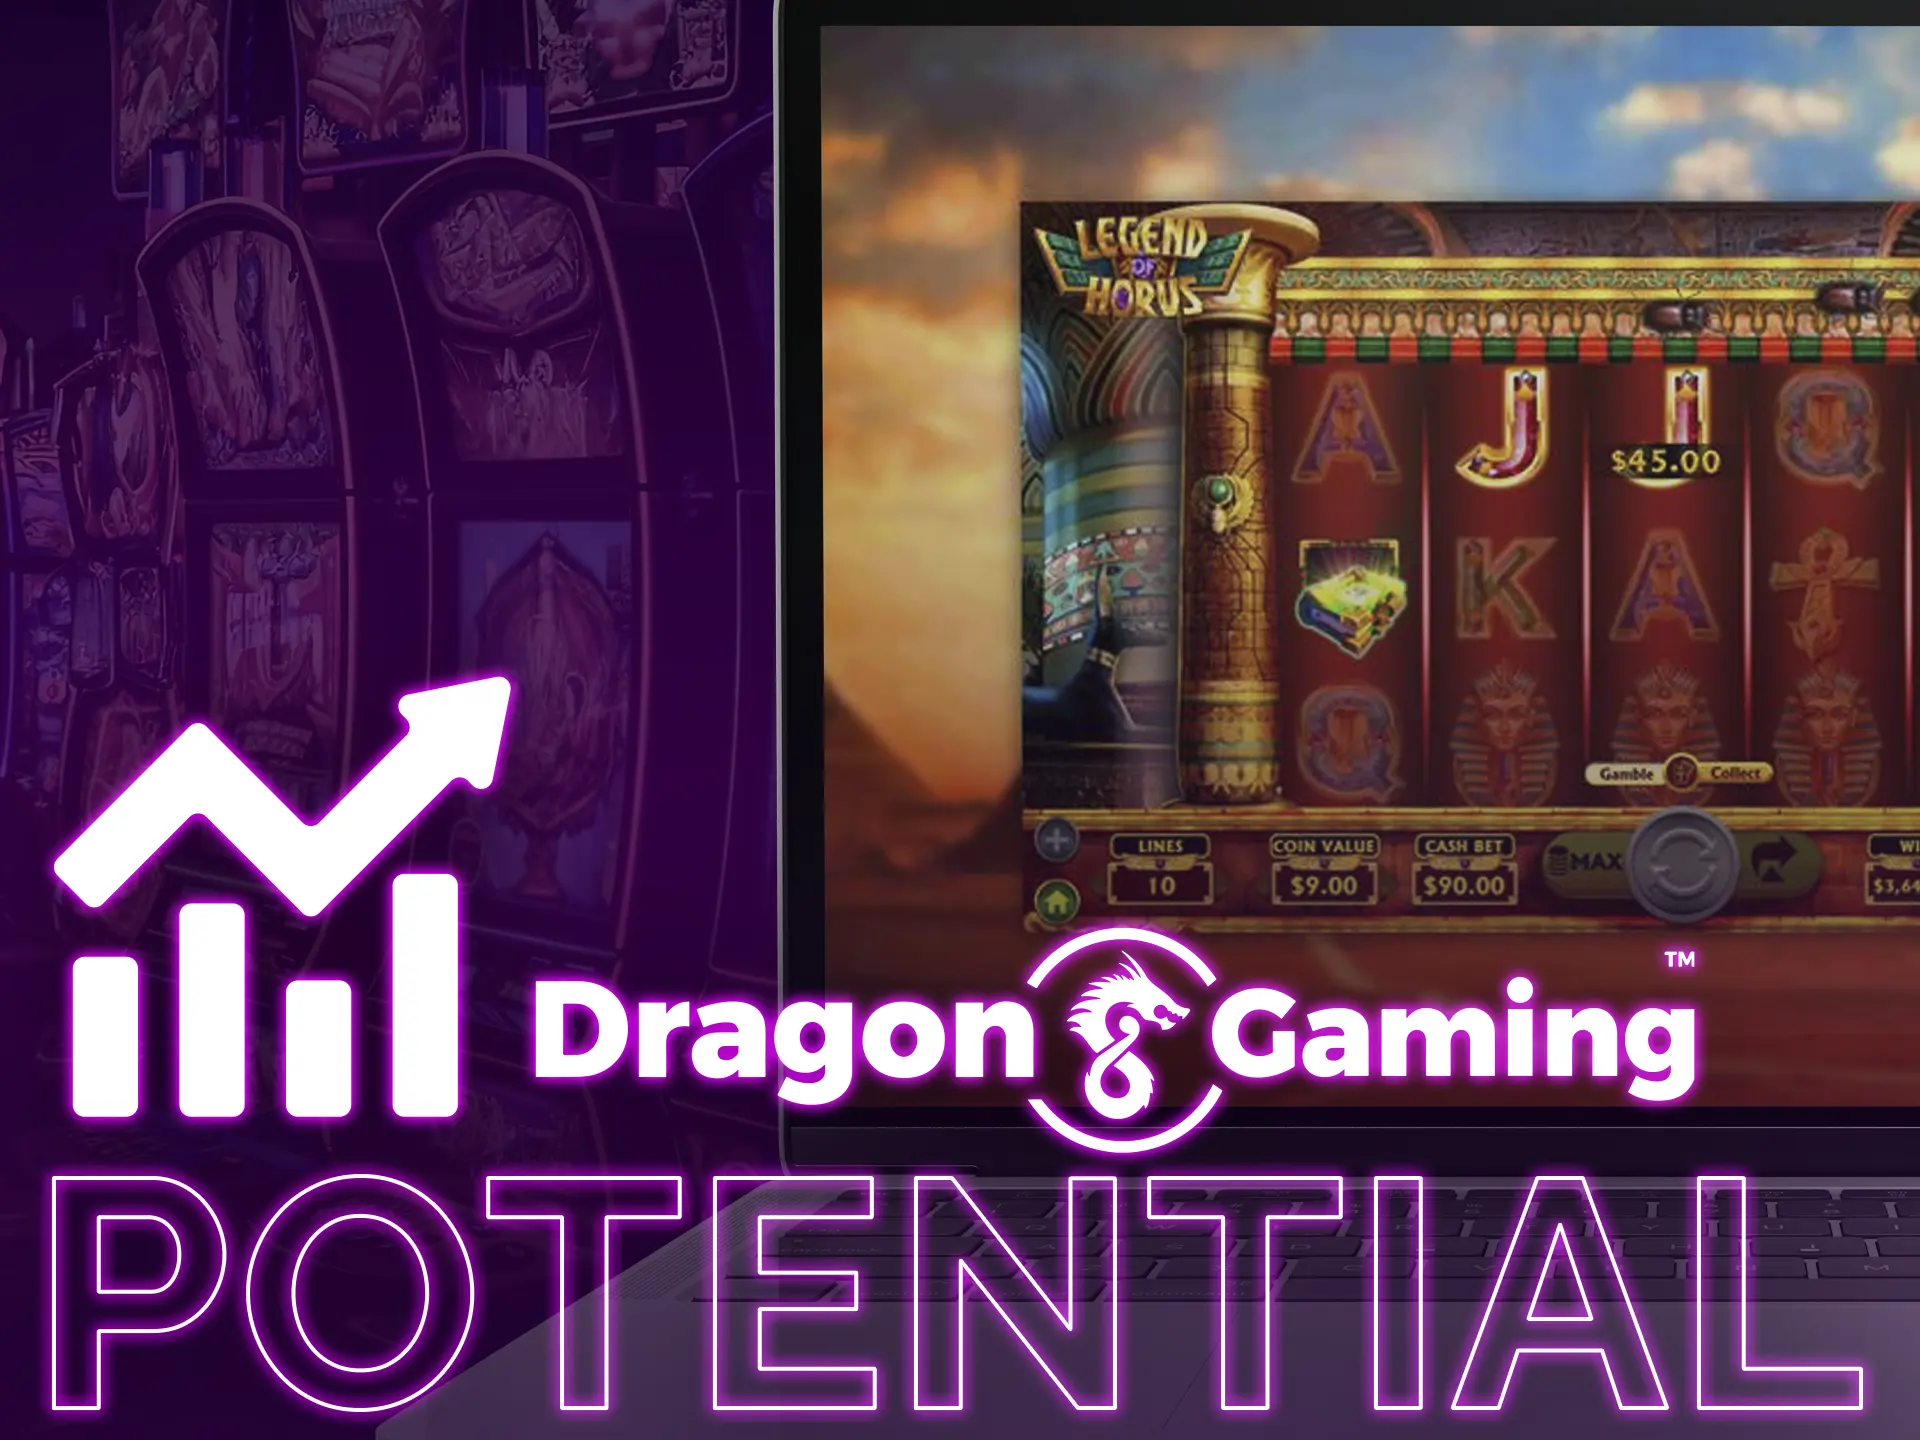 Dragon Gaming slots offer high winning potential, like Twin Dragons.